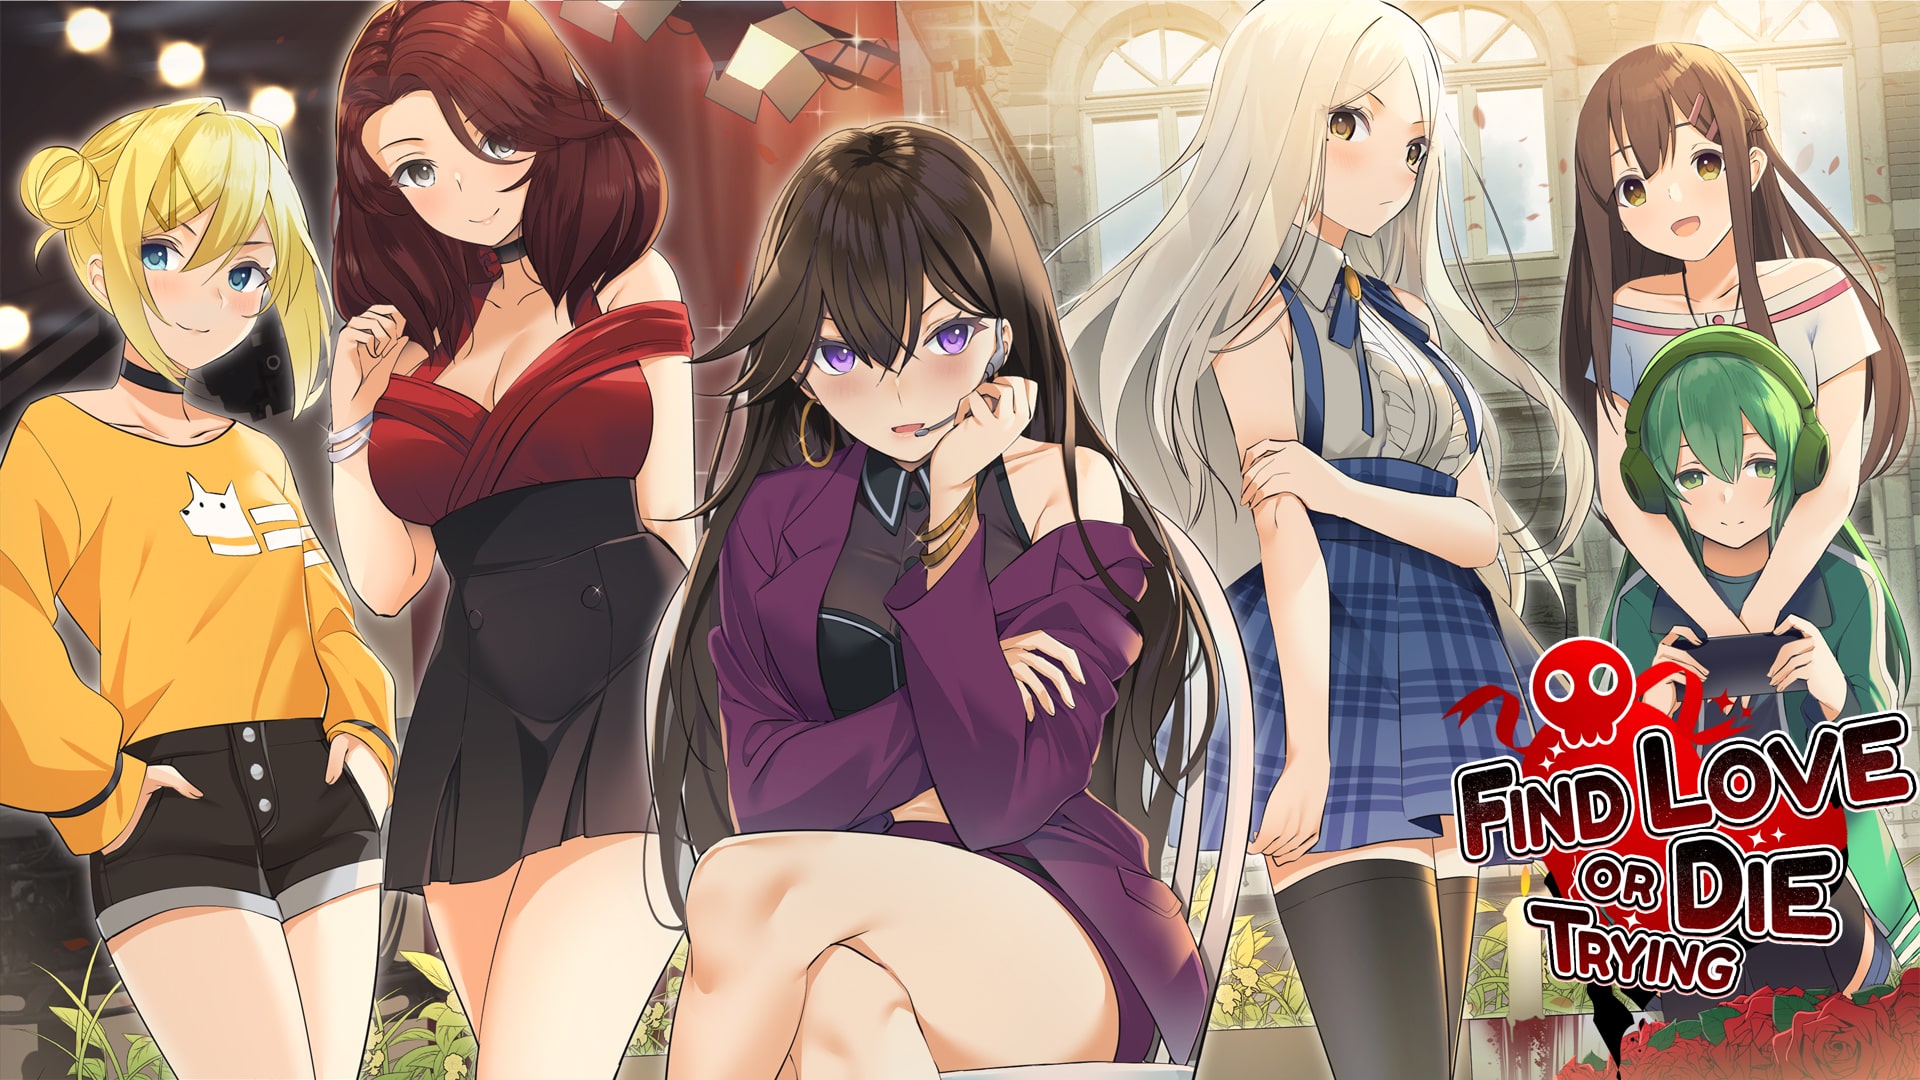 My free dateordie dating sim Find Love or Die Trying is out now on  Steam for PC and Mac news  Mod DB